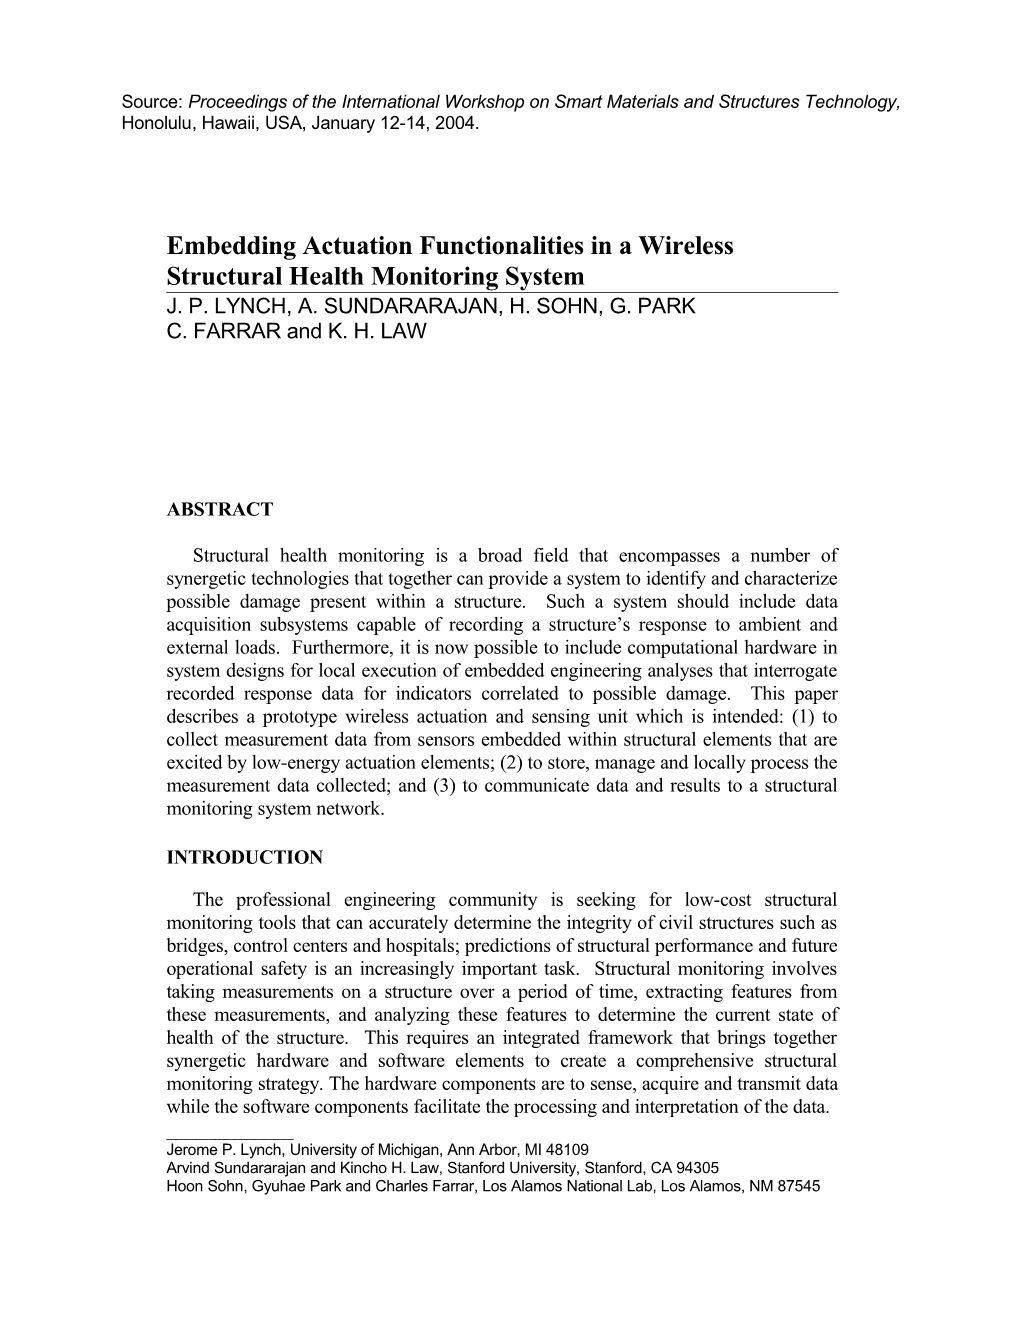 Embedding Actuation Functionalities in a Wireless Structural Health Monitoring System